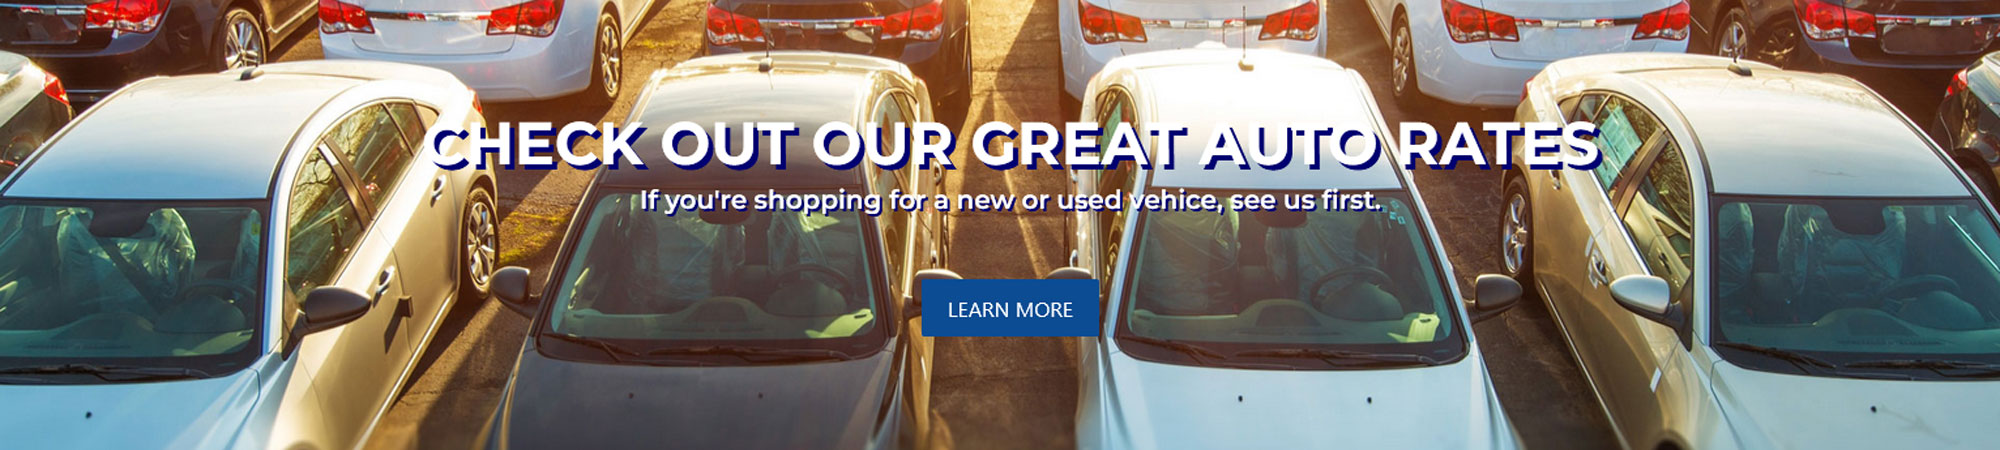 Check out our great auto rates